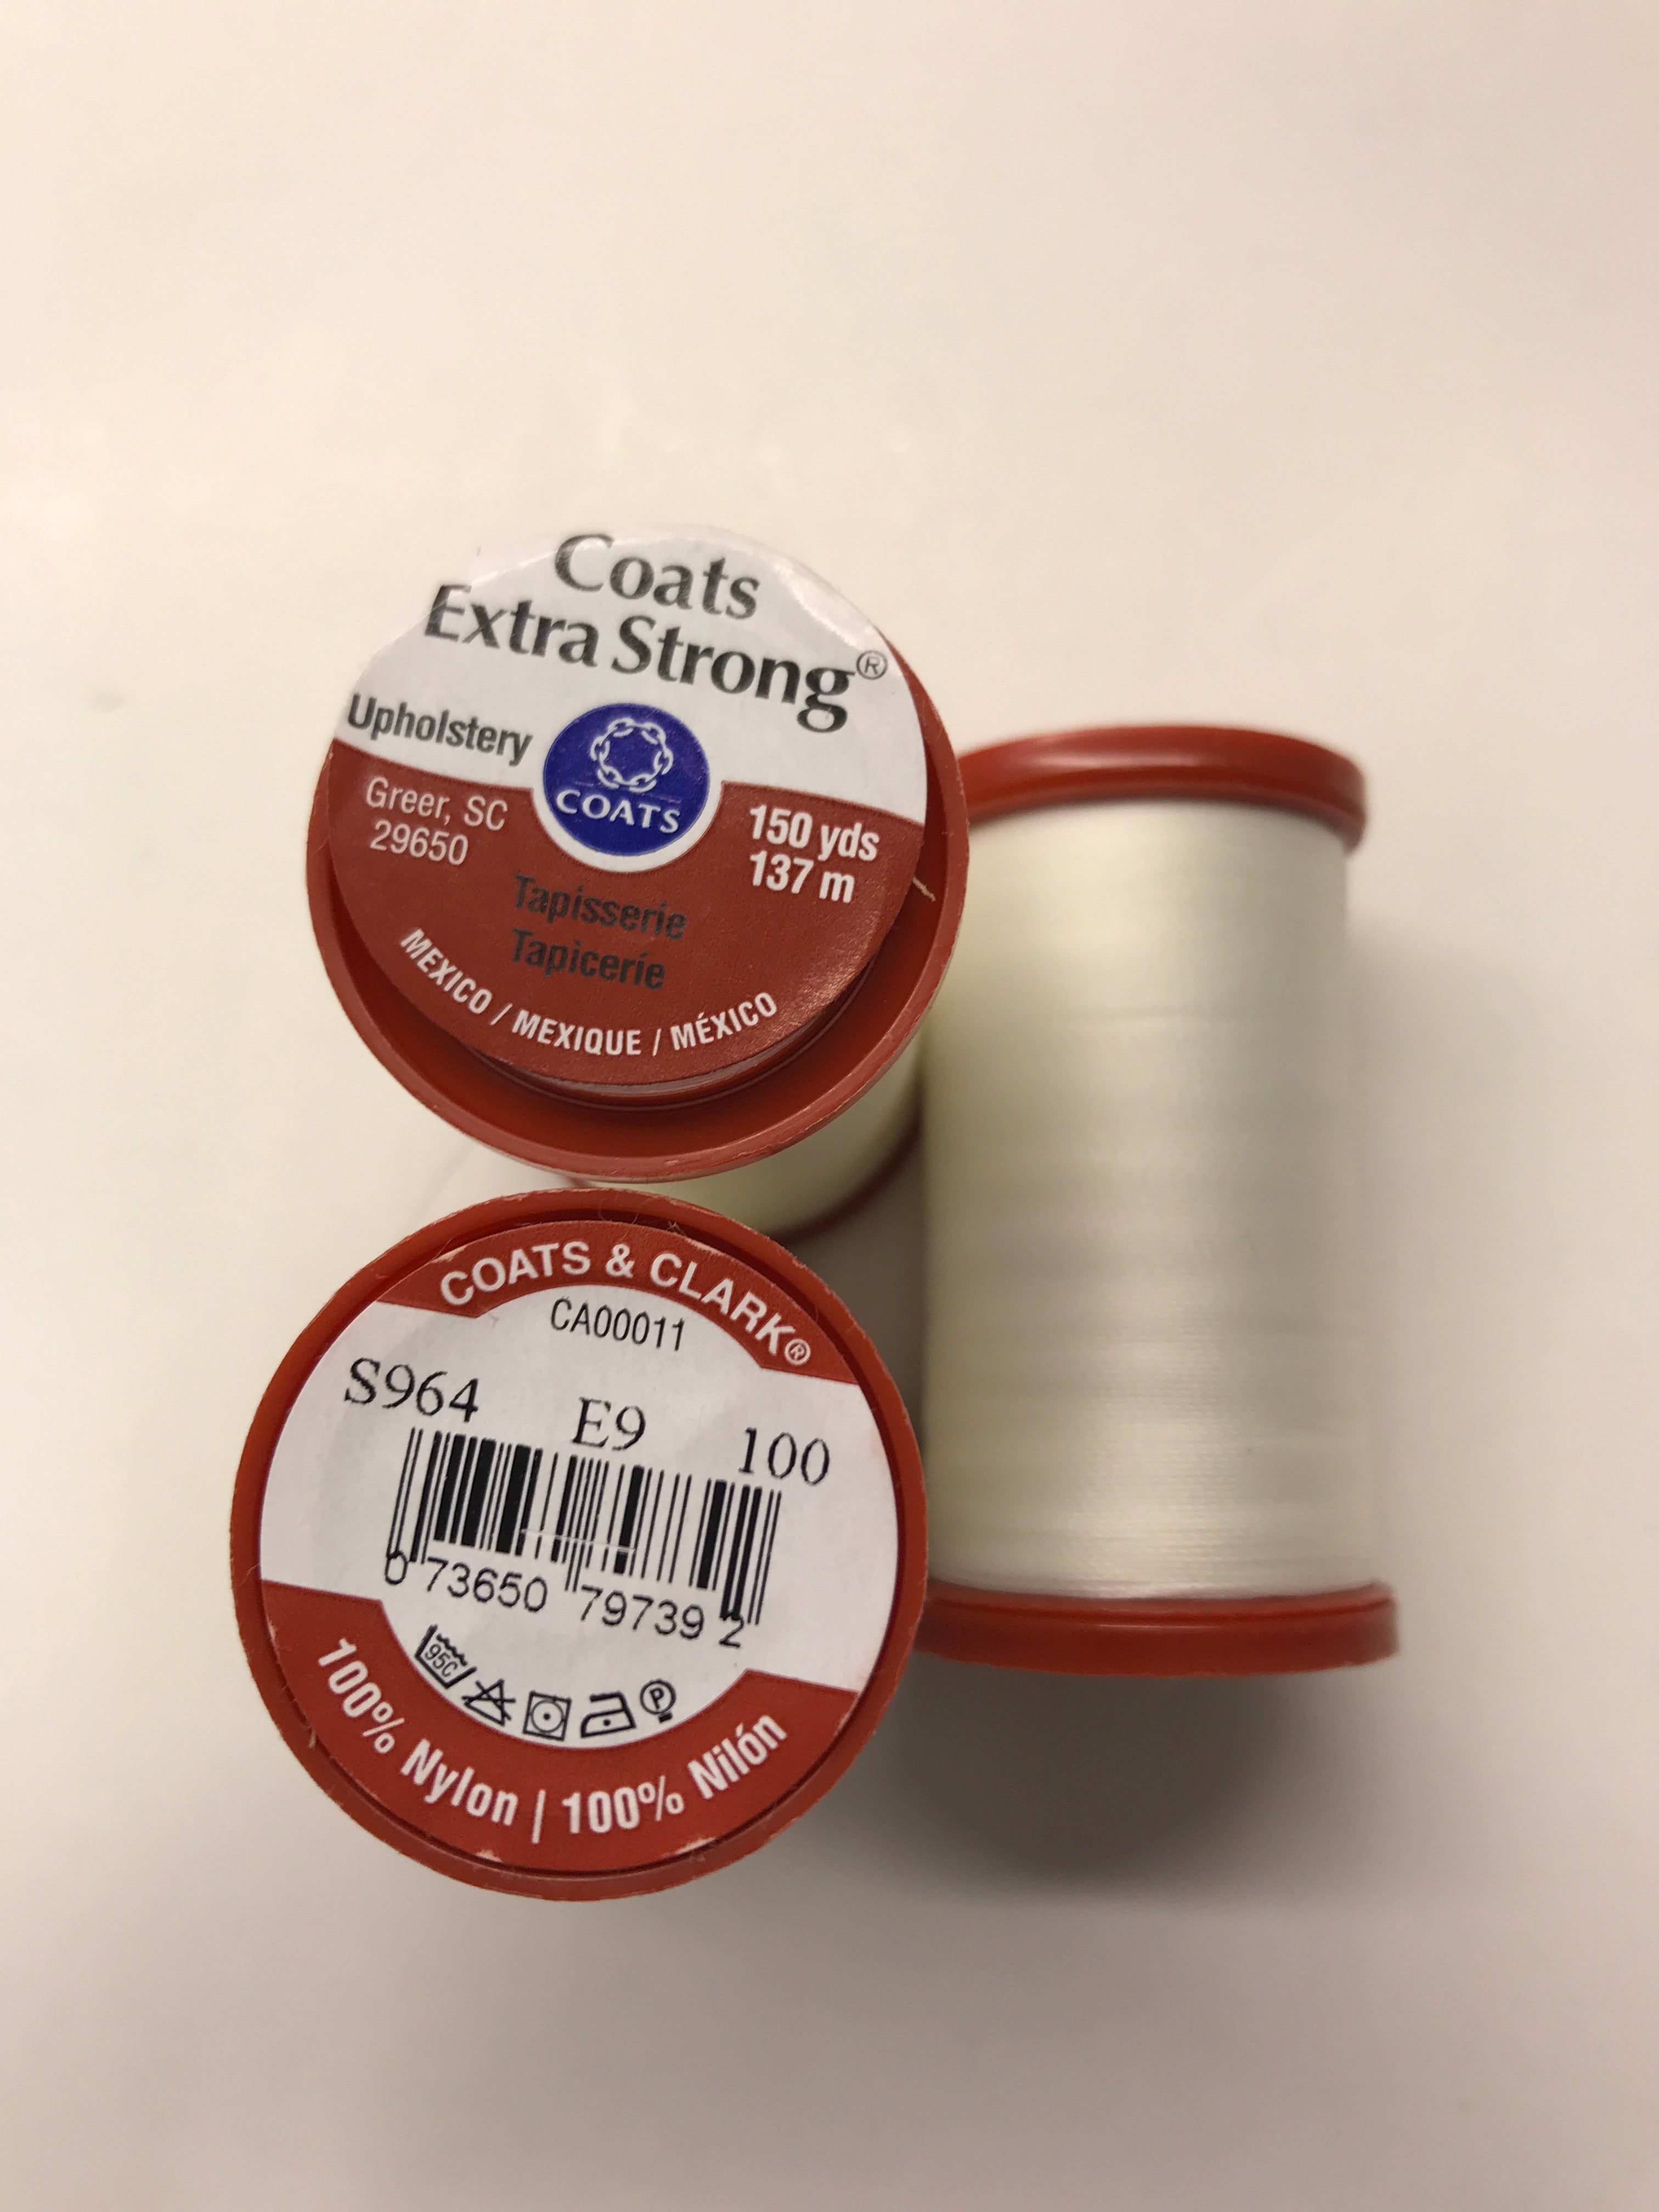 Coats Extra Strong Upholstery Thread - S964-100 - White